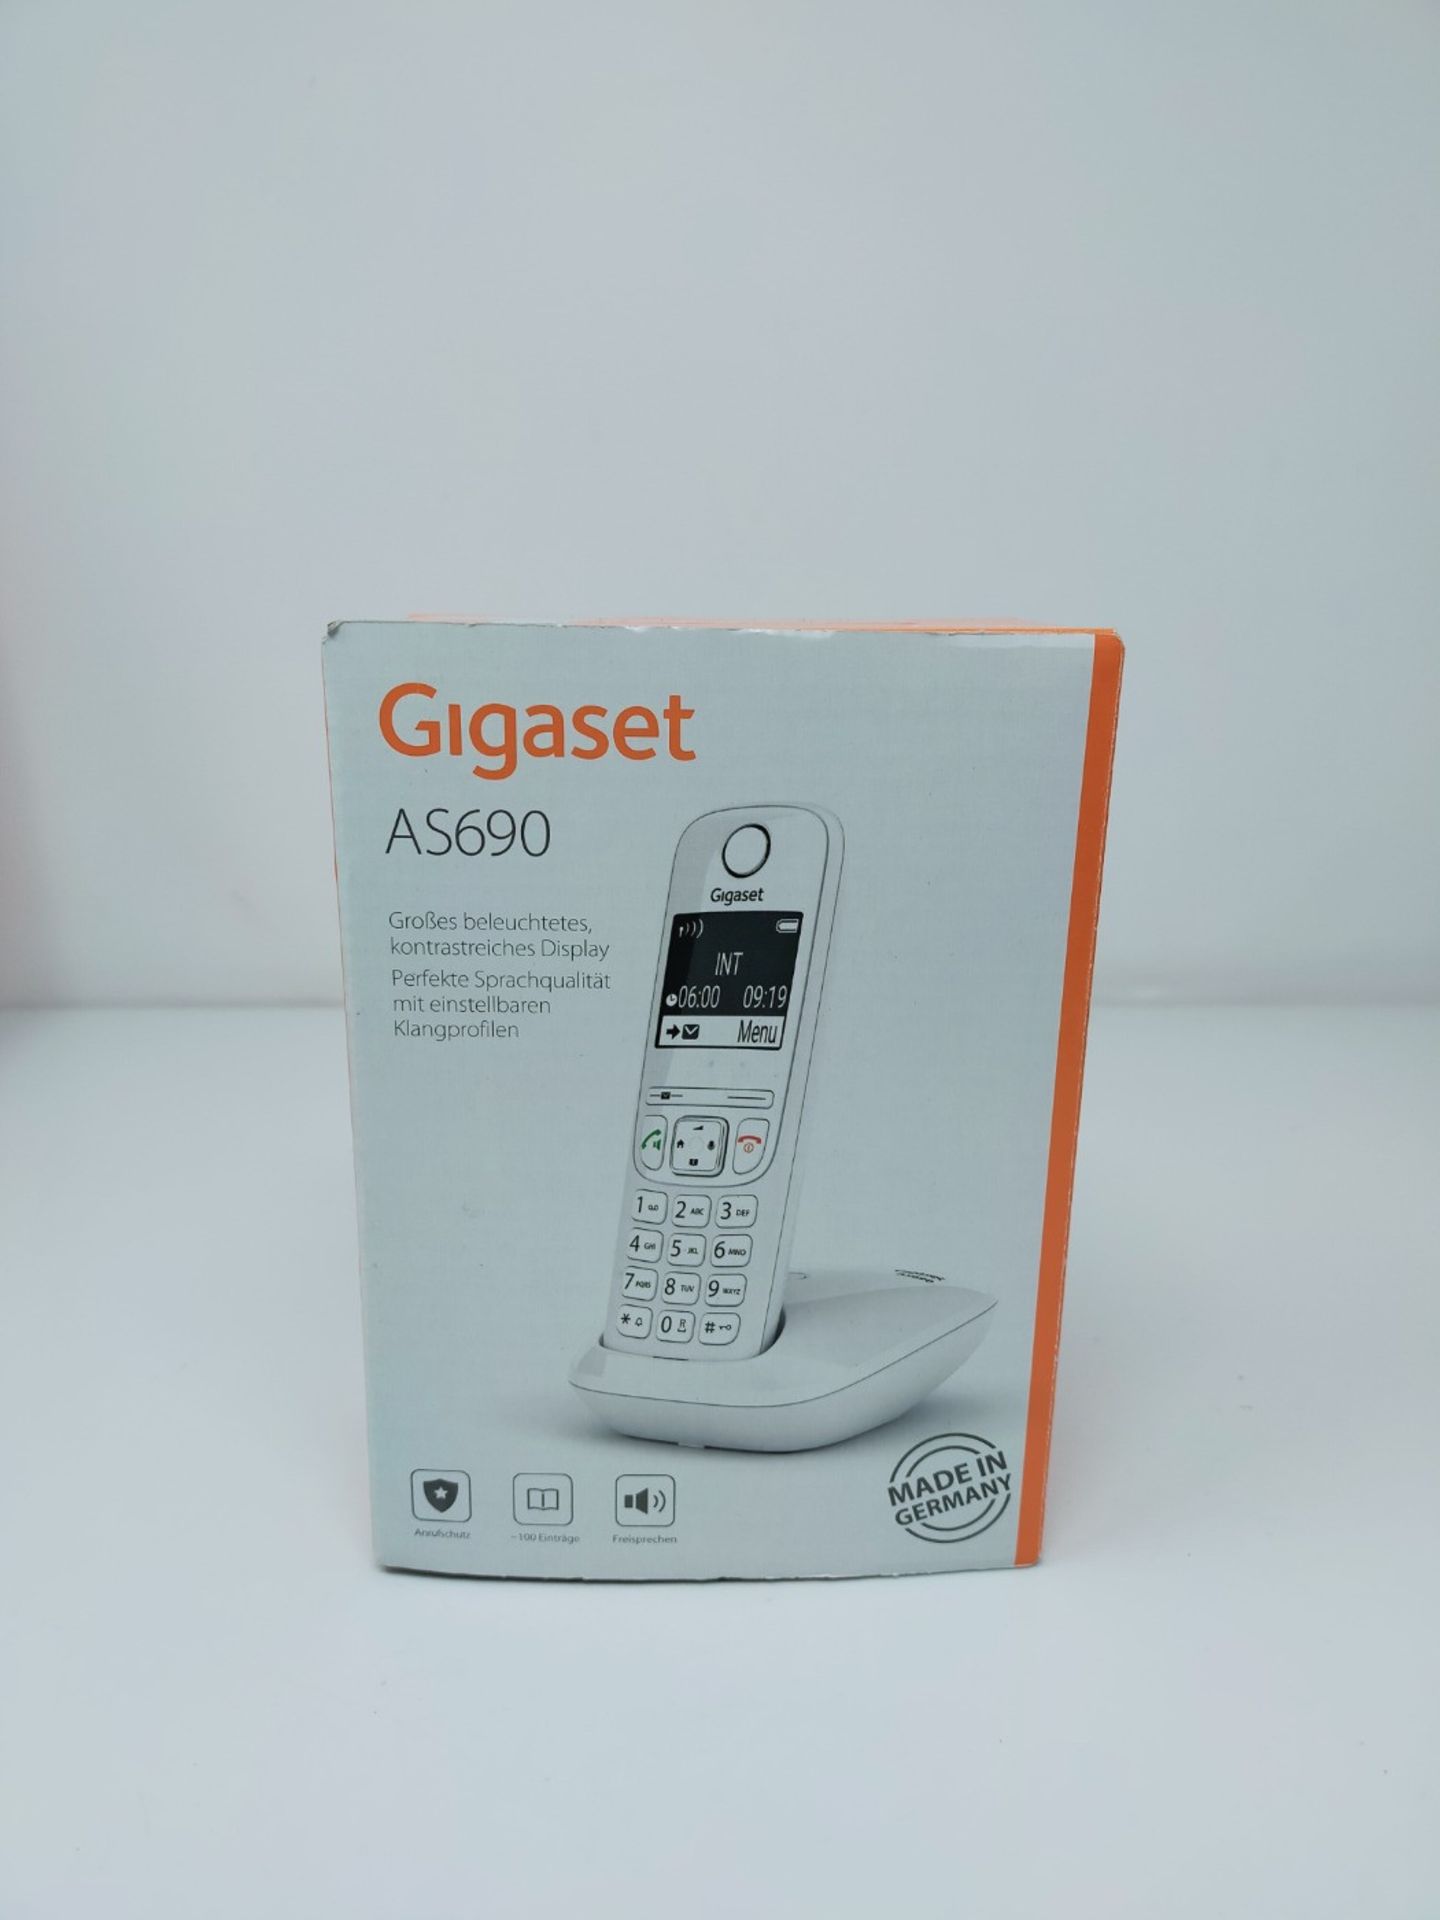 Gigaset A690, cordless telephone - large, high-contrast display - brilliant audio qual - Image 2 of 3